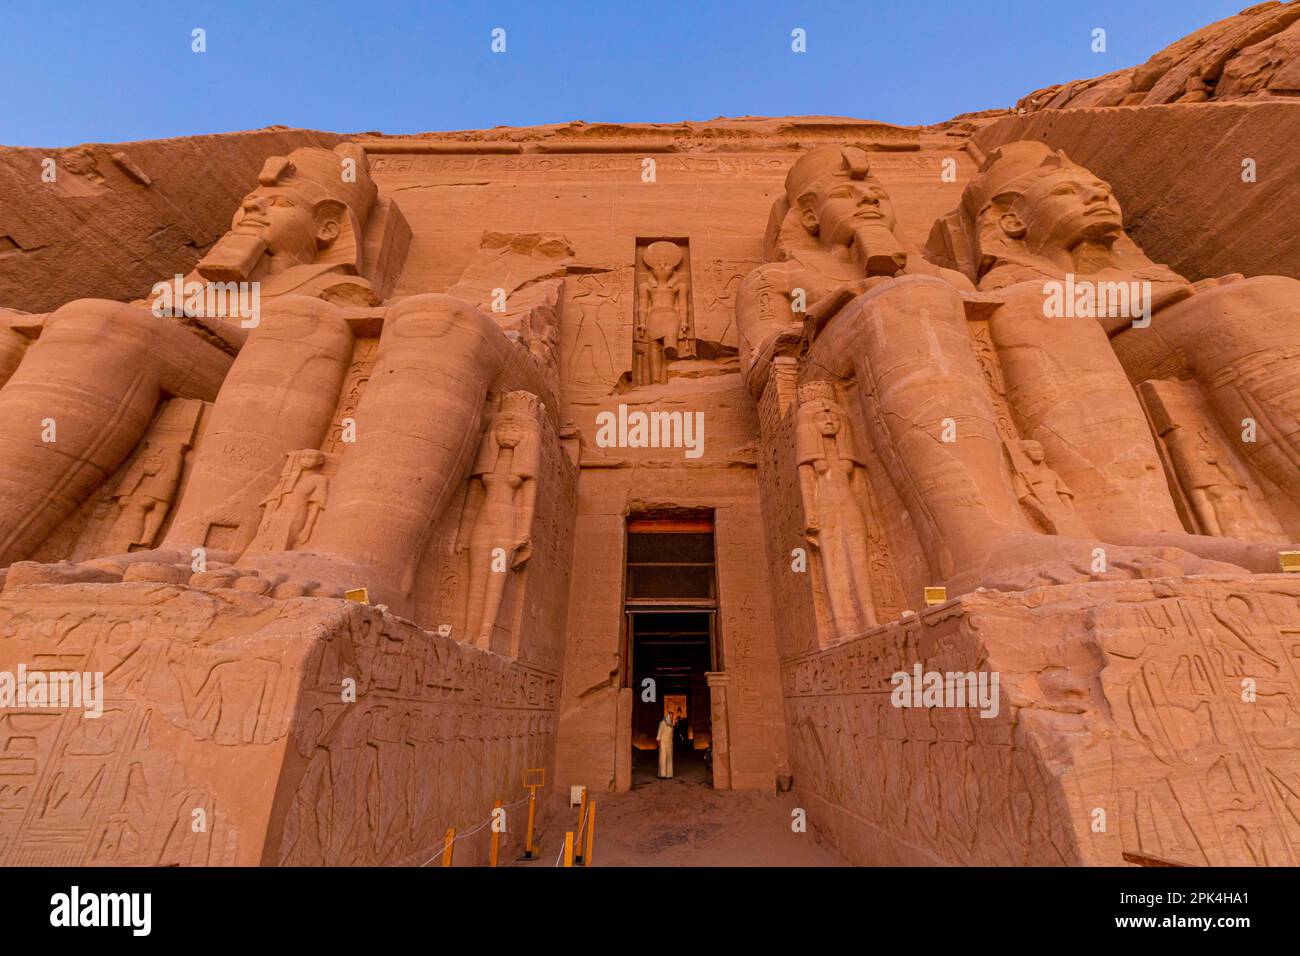 The Great Temple of Ramesses ll, Abu Simbel, Egypt, North East Africa Stock Photo